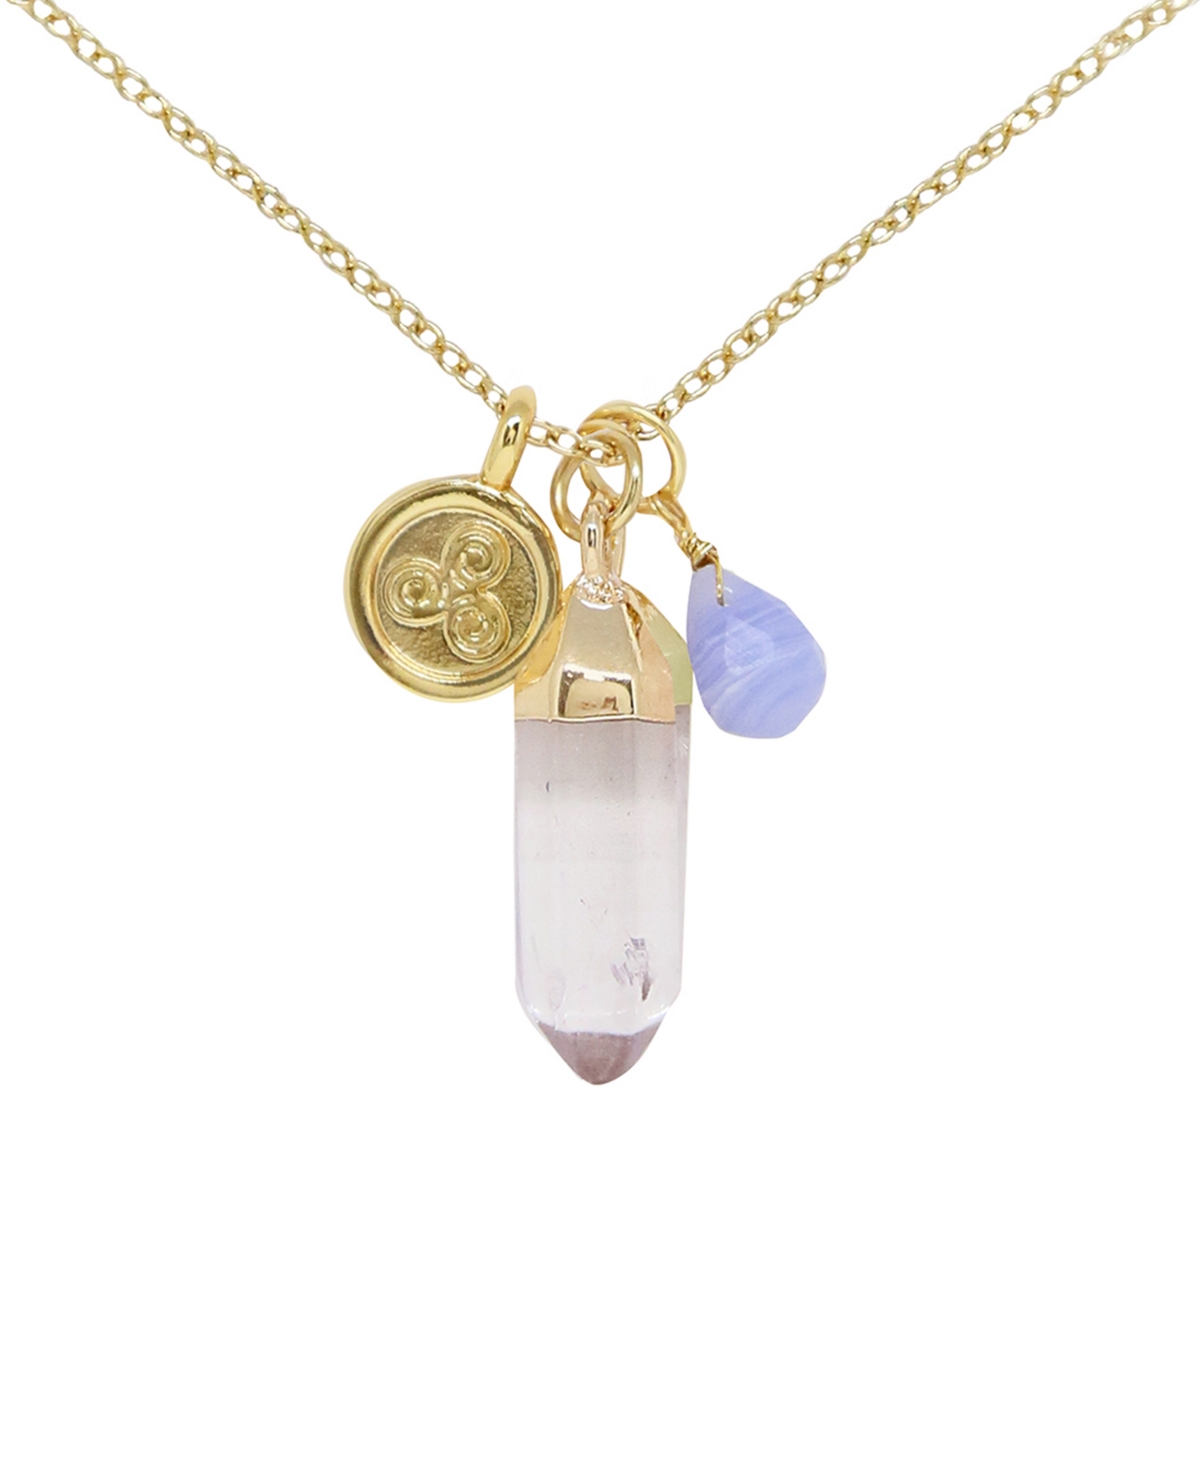 Charged Crystal Quartz Charm Necklace With Agate In Blue Agate